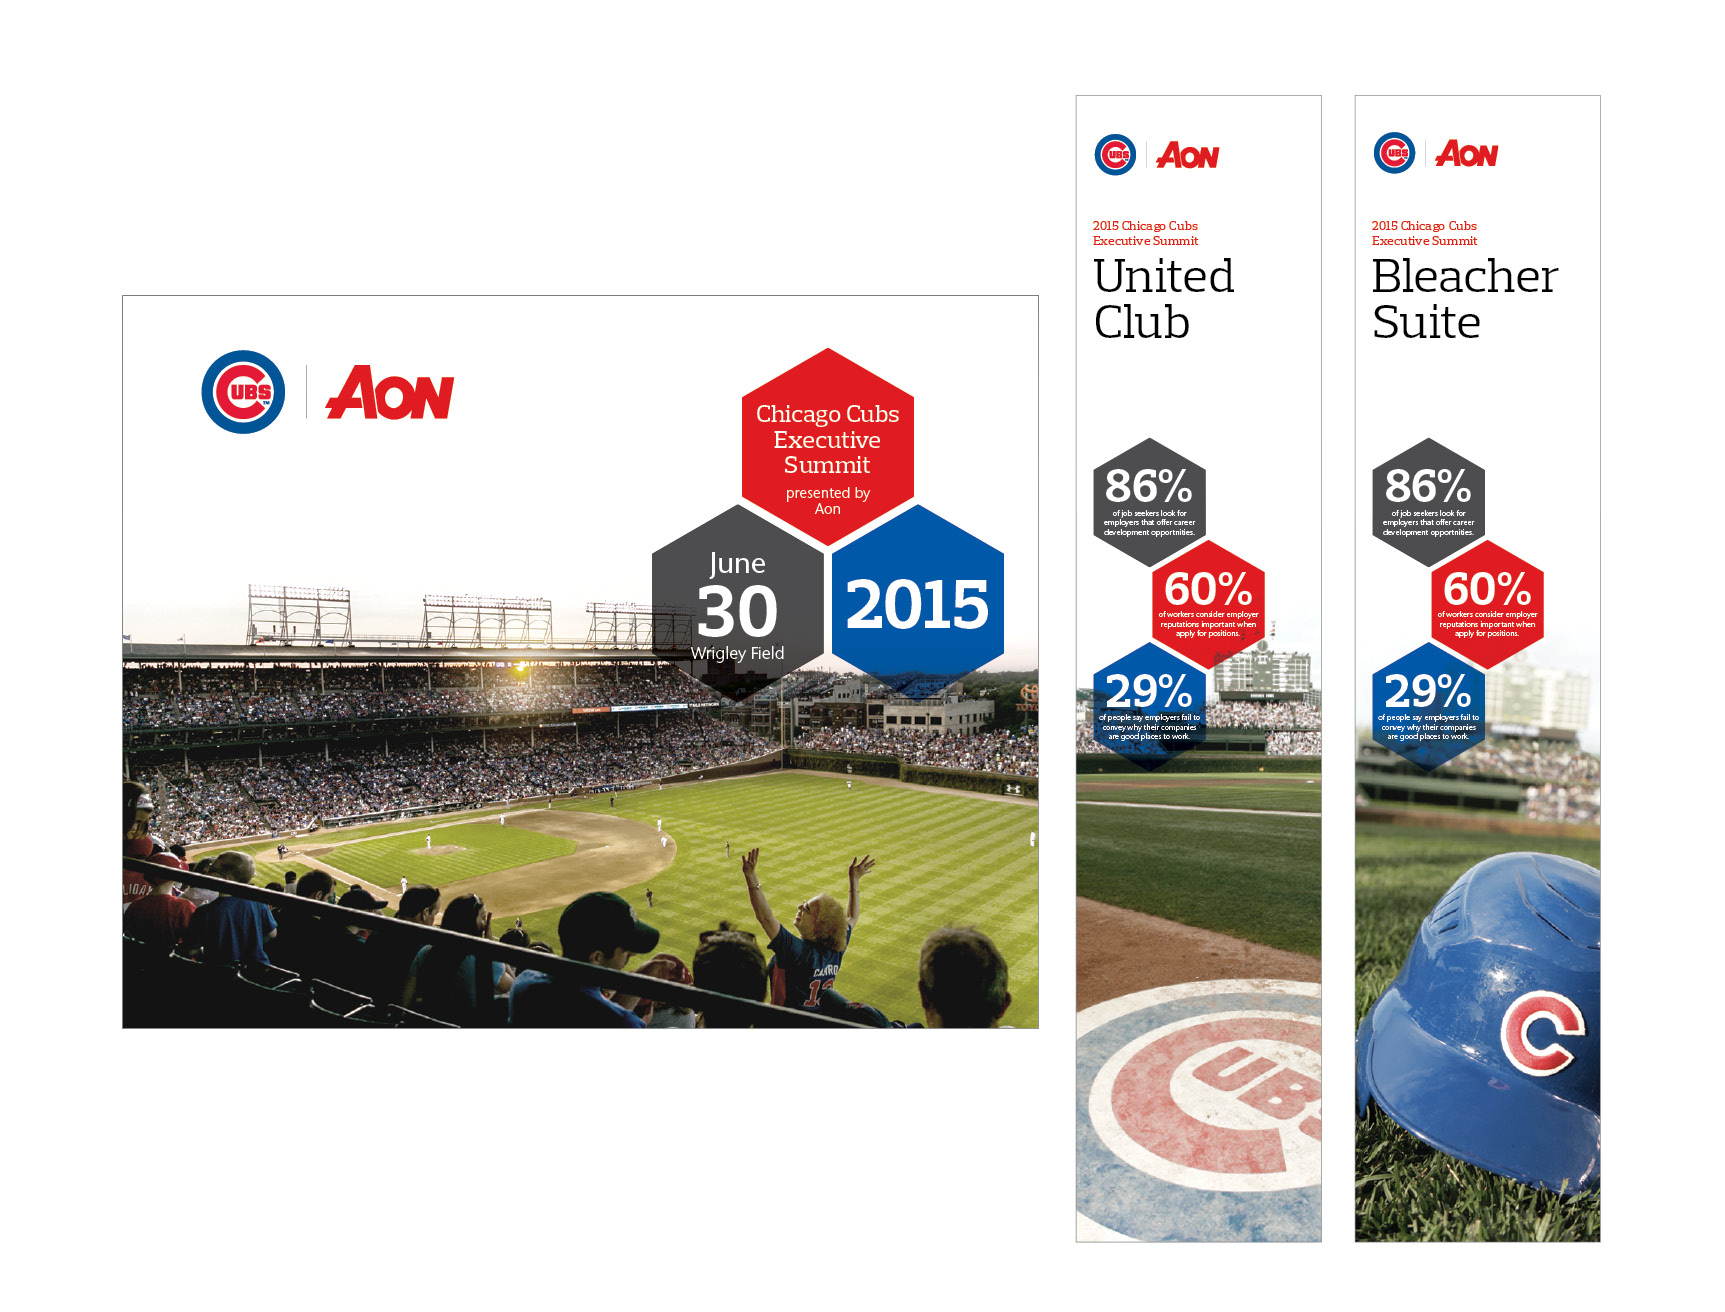  Stage backdrop (left) and directional banners for the 2015 Chicago Cubs Executive Summit. 